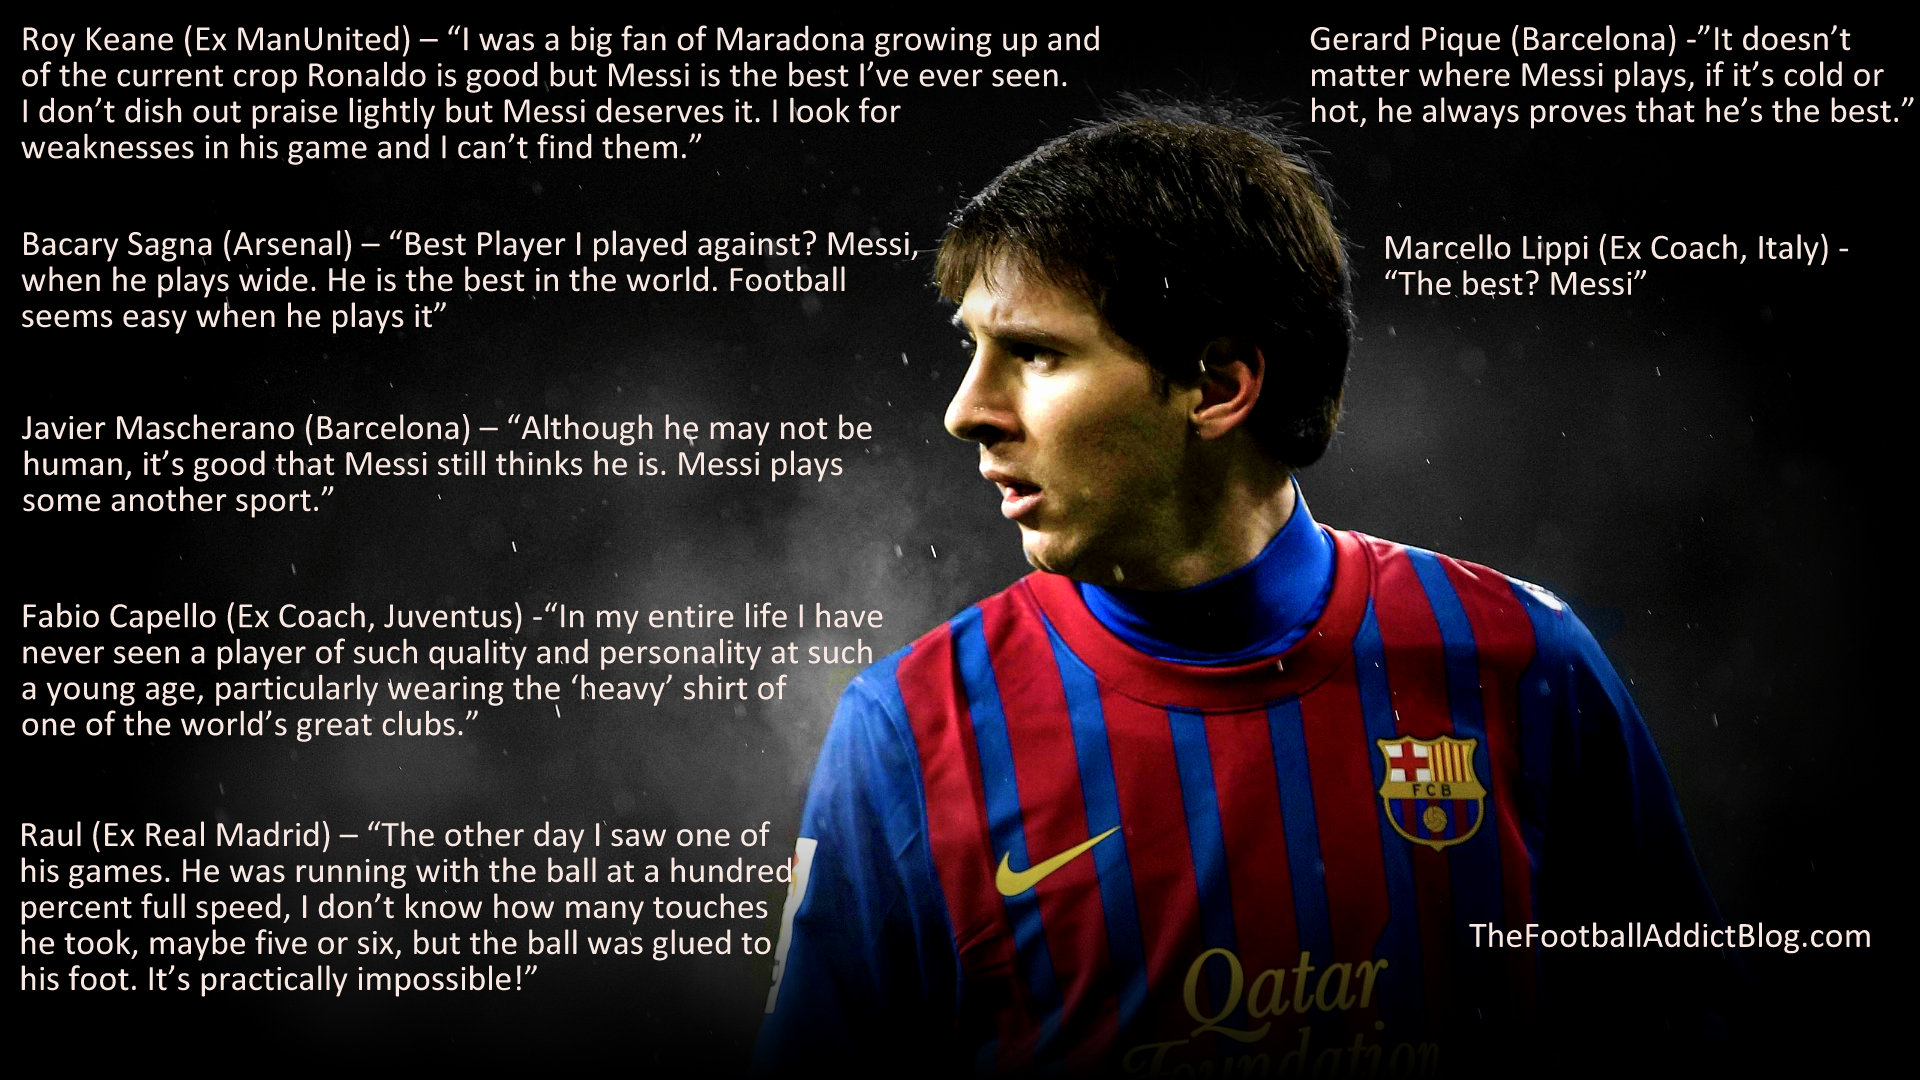 20 Quotes By Lionel Messi That Will Leave You Inspired